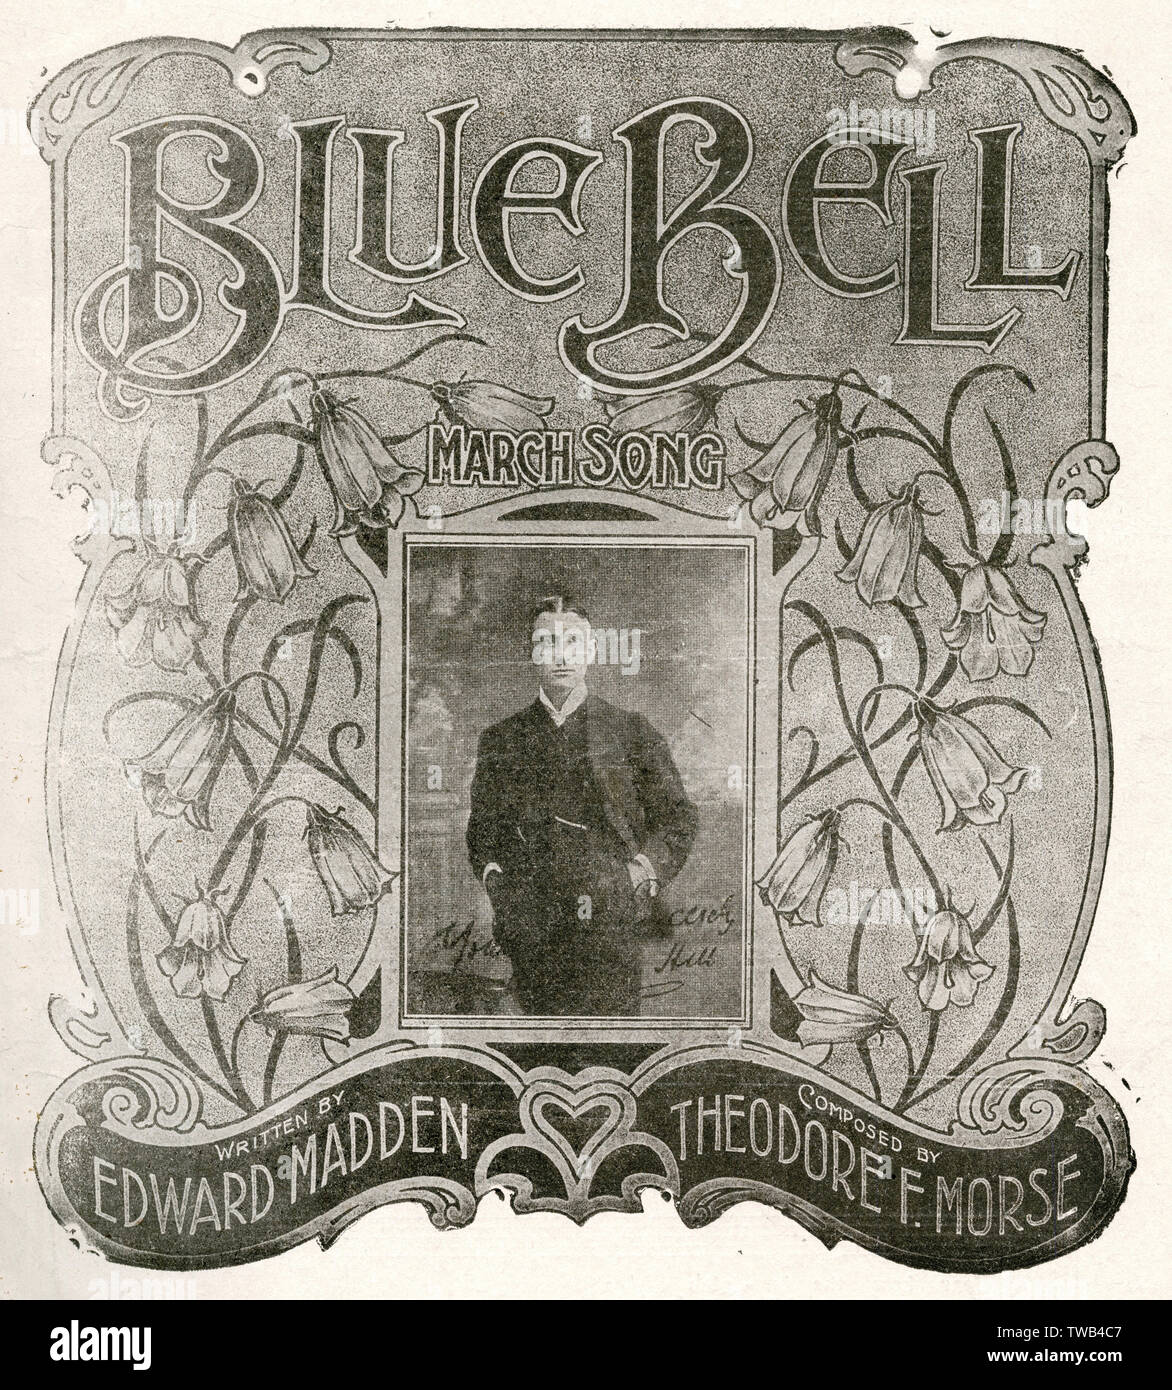 Music cover, Blue Bell, march song Stock Photo